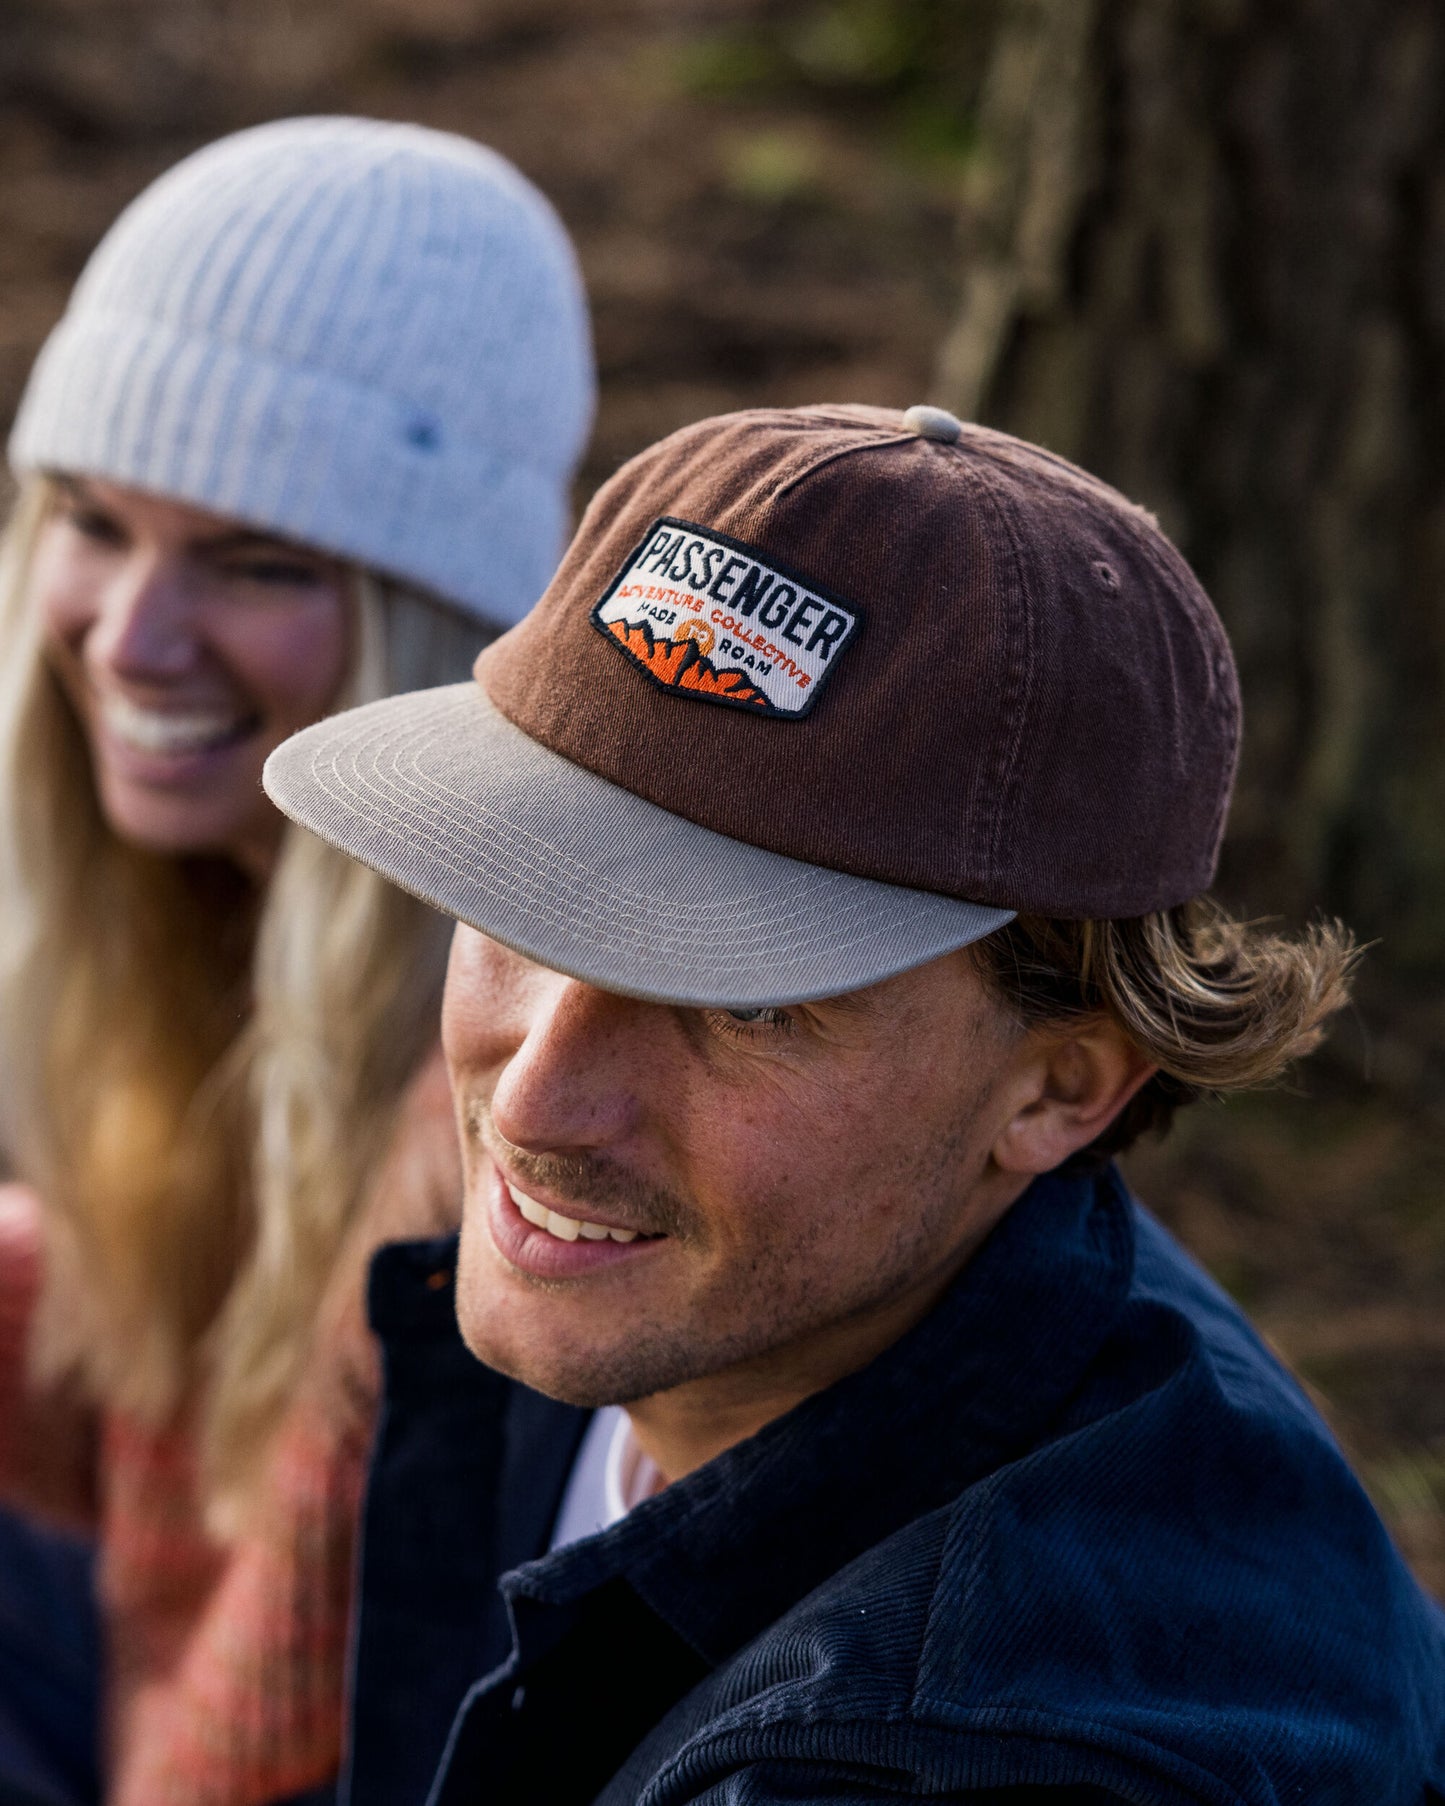 Barrel Recycled Low Profile Cap - Chestnut